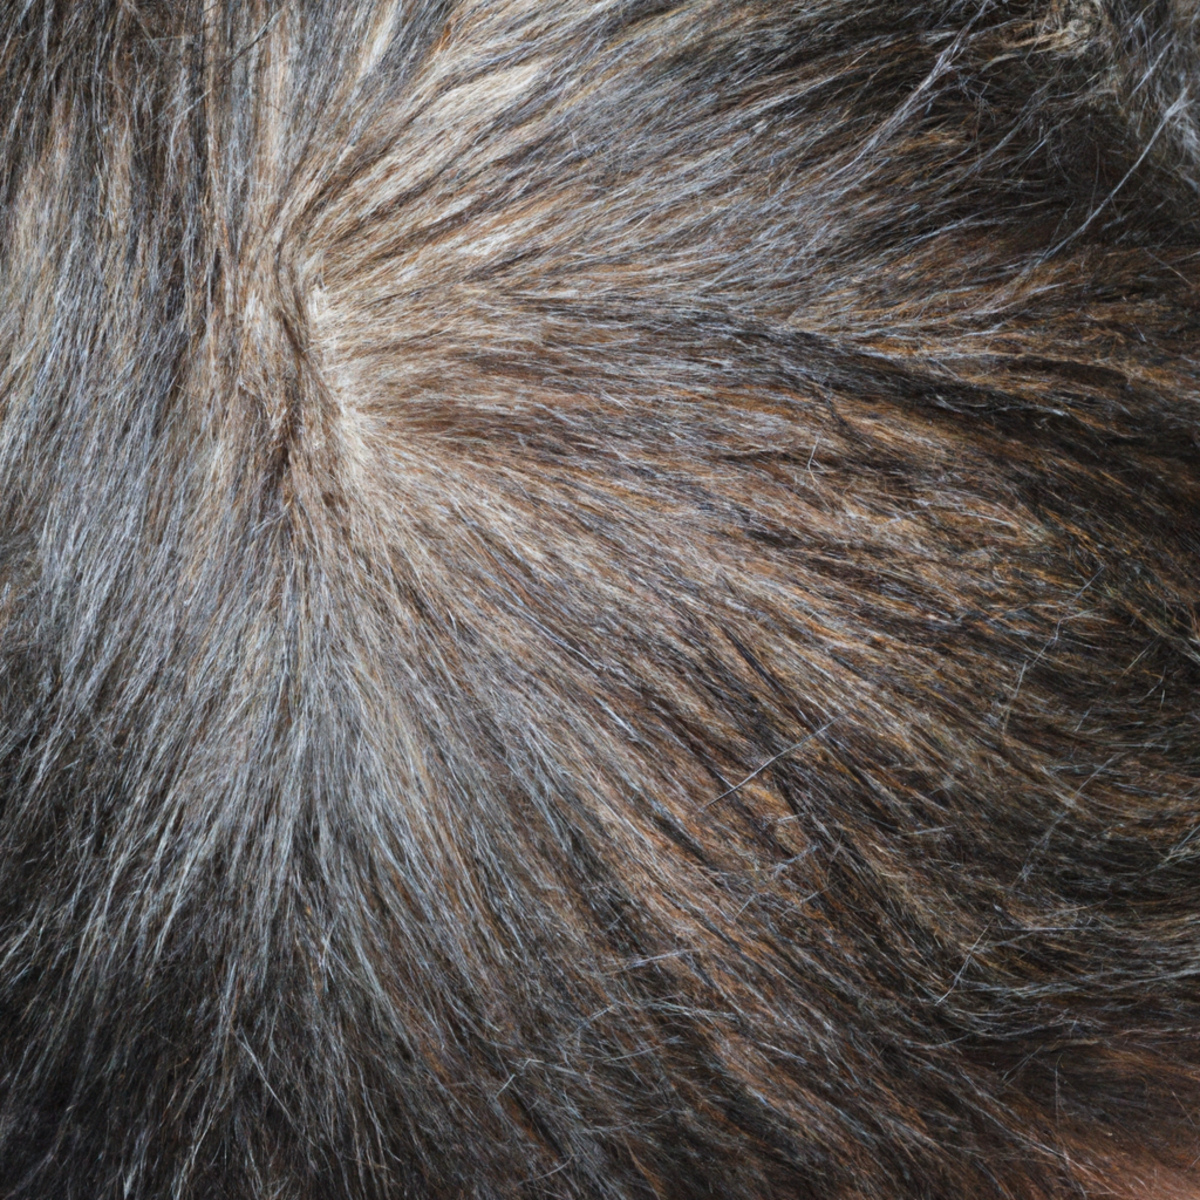 Patchy hair follicles, thin strands, reduced density. Smooth scalp lacking sweat or oil secretion. Hypohidrotic Ectodermal Dysplasia's impact on sweat gland development.